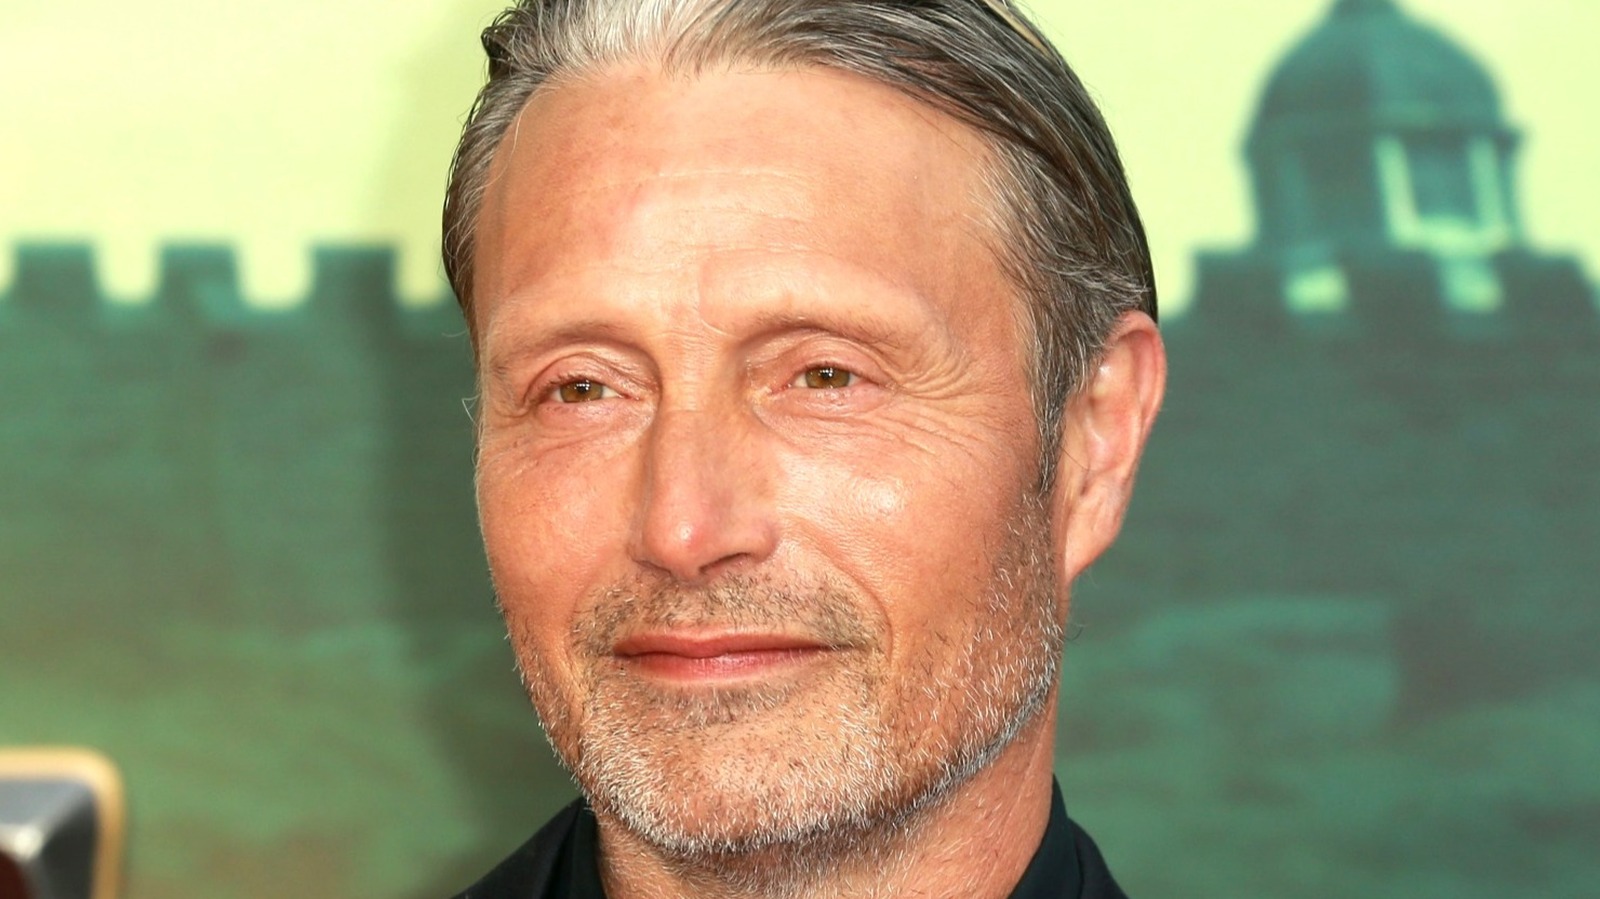 Mads Mikkelsen Made Some Surprising Remarks About Harrison Ford's Health